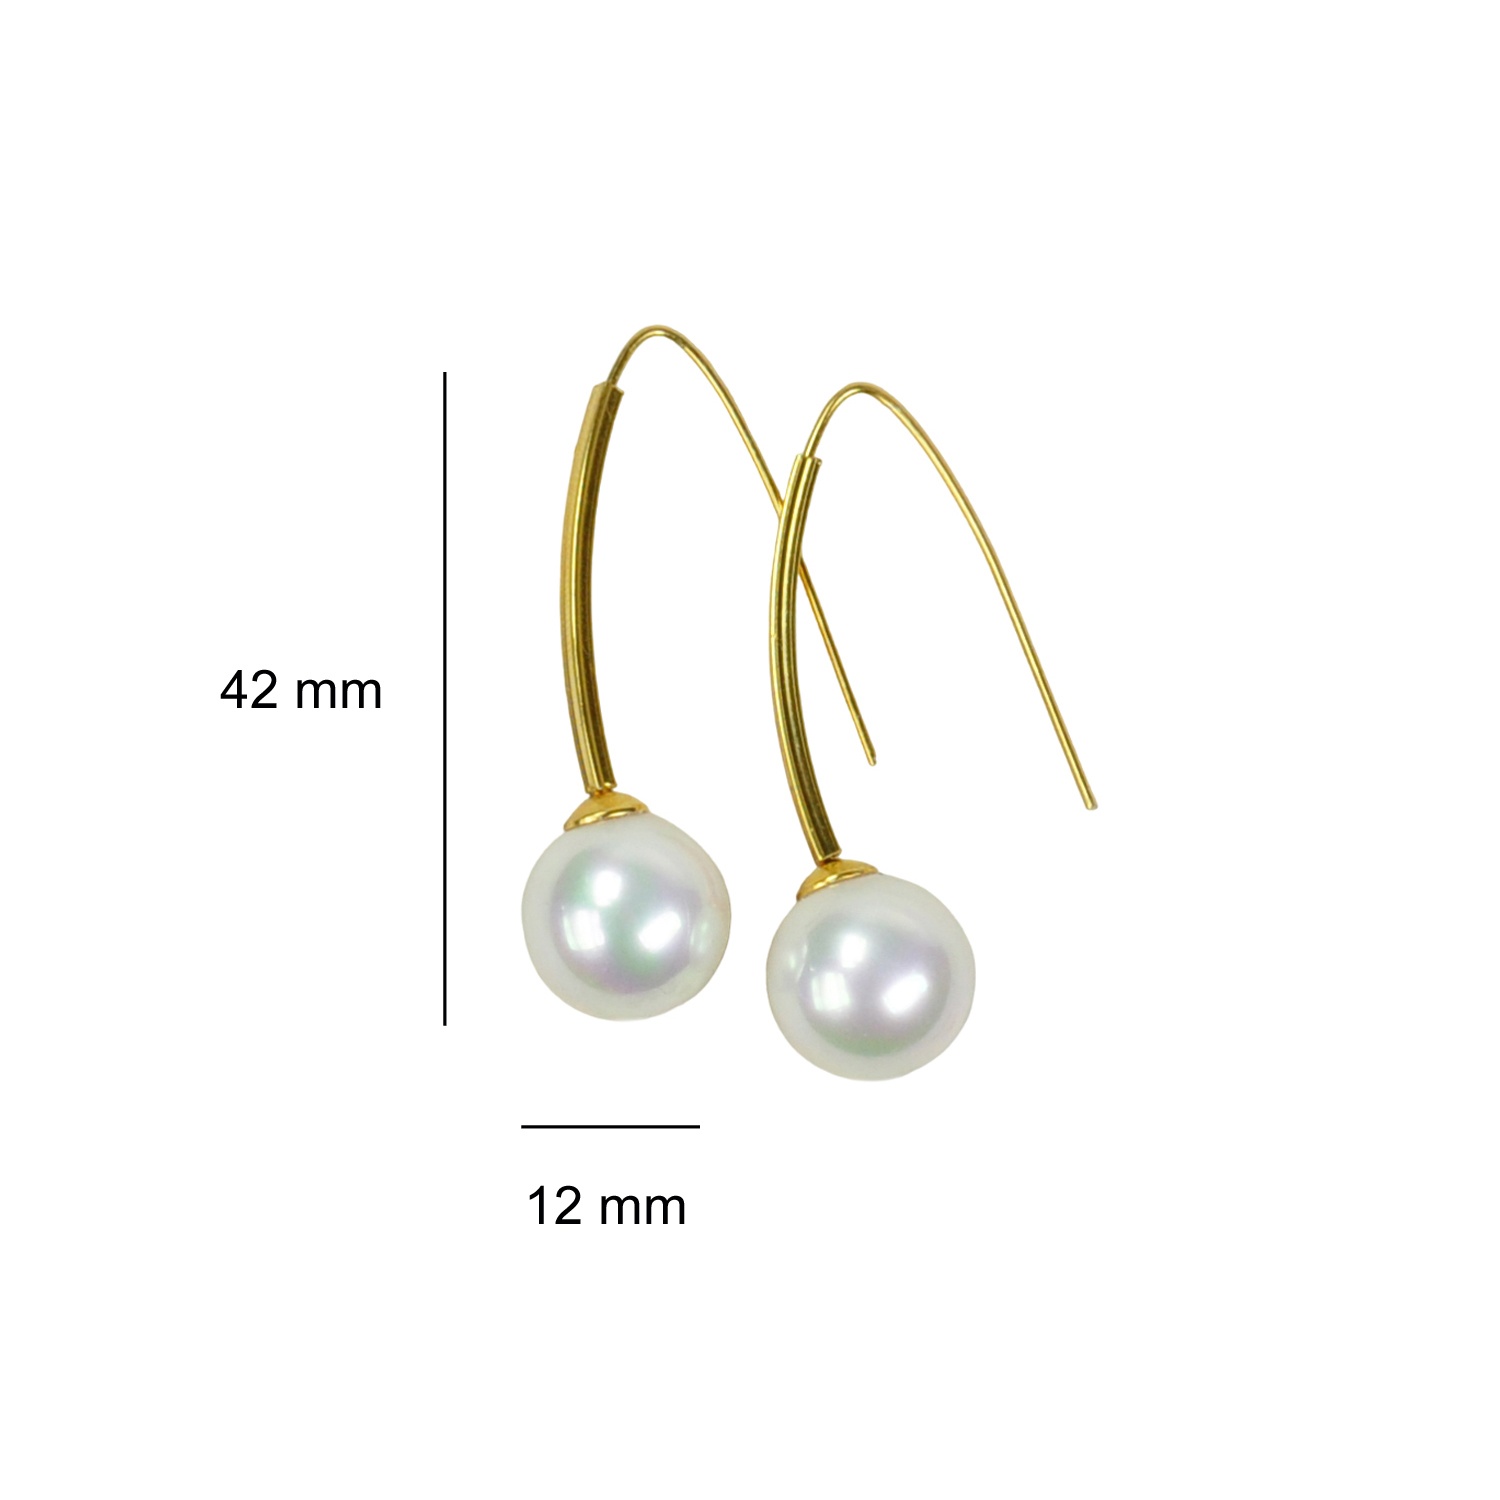 18 carat goldplated Sterling Silver Earrings with white Pearls 2